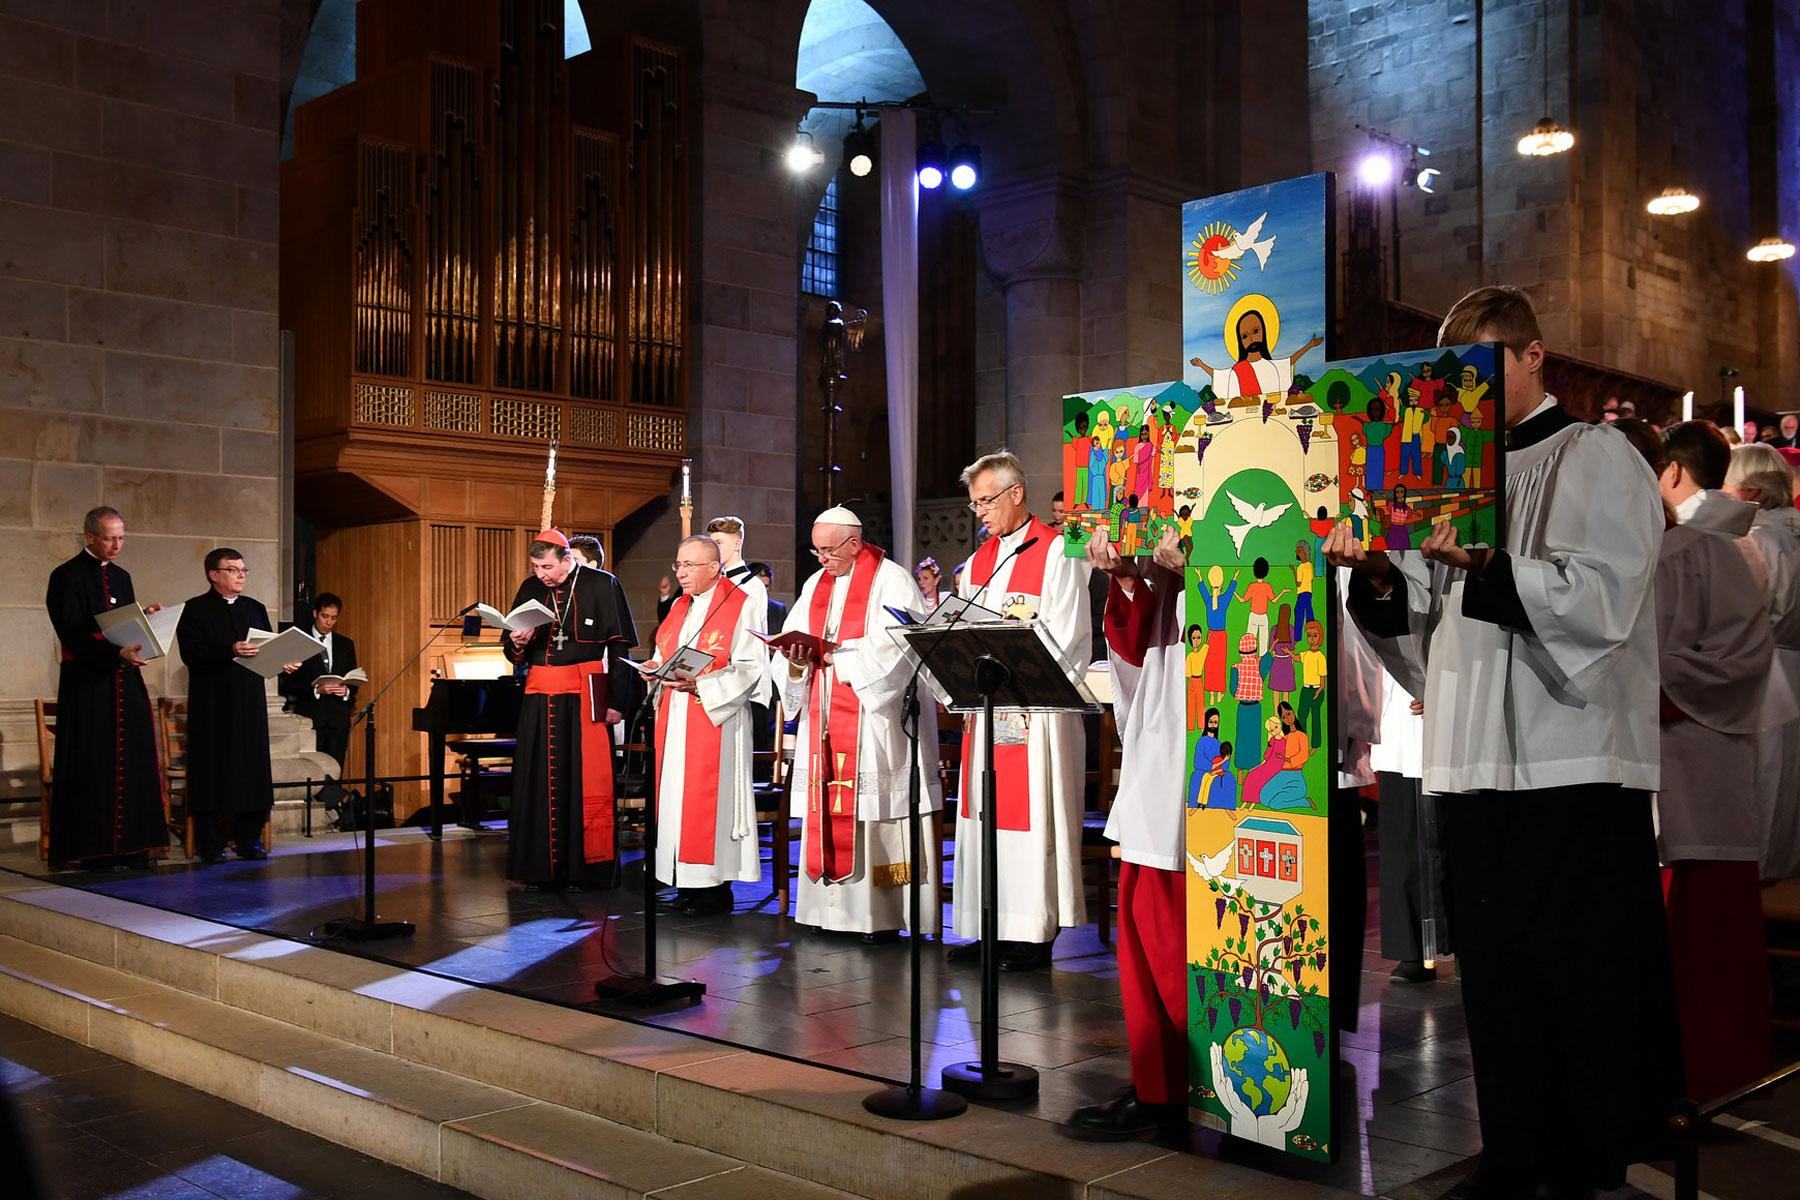 Kurt Cardinal Koch, President, Pontifical Council for Promoting Christian Unity; LWF President Bishop Dr Munib A. Younan; Pope Francis; and LWF General Secretary Rev. Dr Martin Junge, at the Joint Catholic-Lutheran Commemoration of the Reformation in Lund, Sweden, 31 October 2016. Photo: LWF